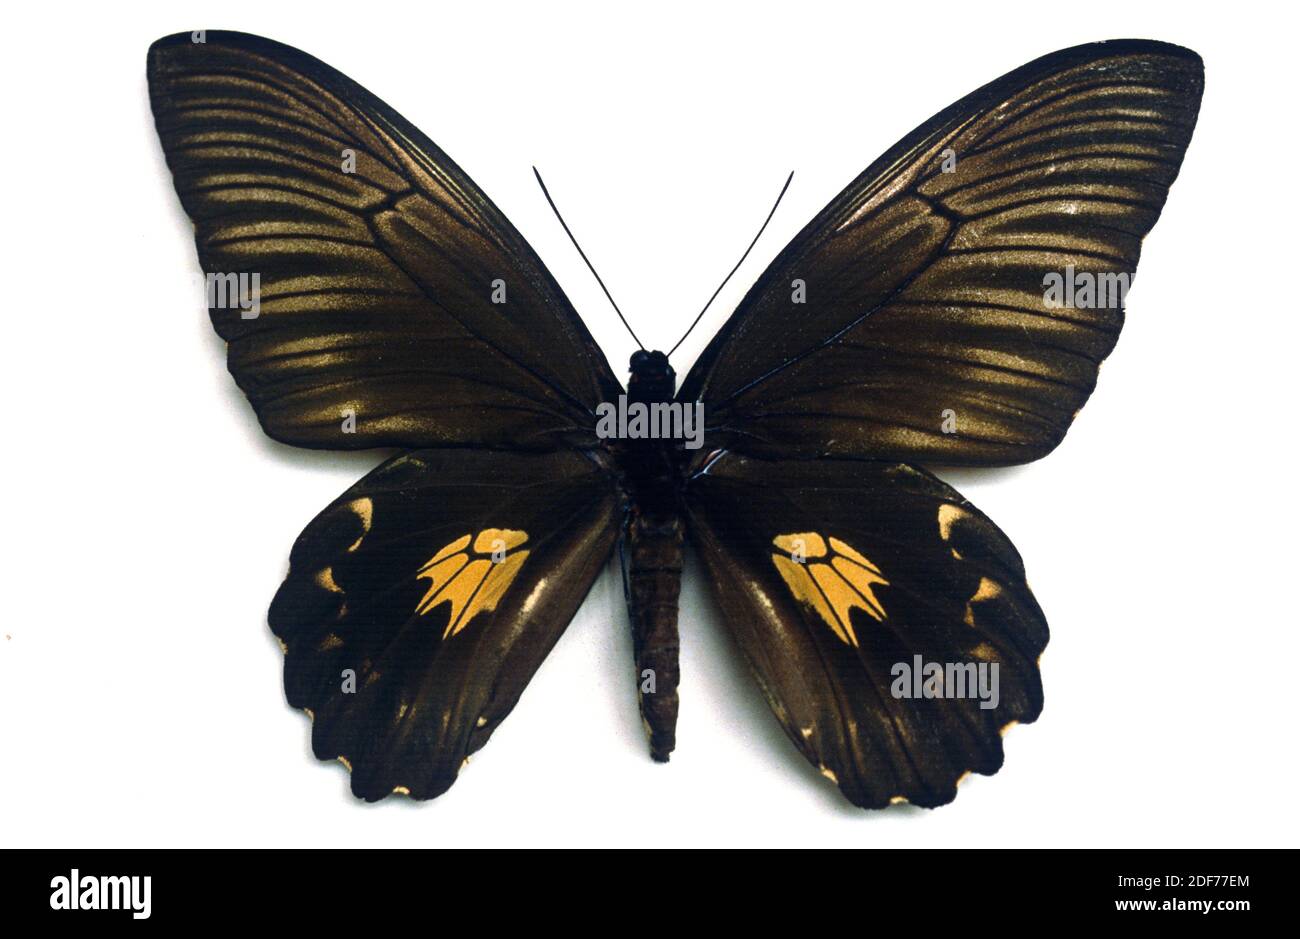 Oblong-spotted birdwing (Troides oblogomaculatus) is a butterfly native to Indonesia and New Guinea. Female, dorsal side. Stock Photo